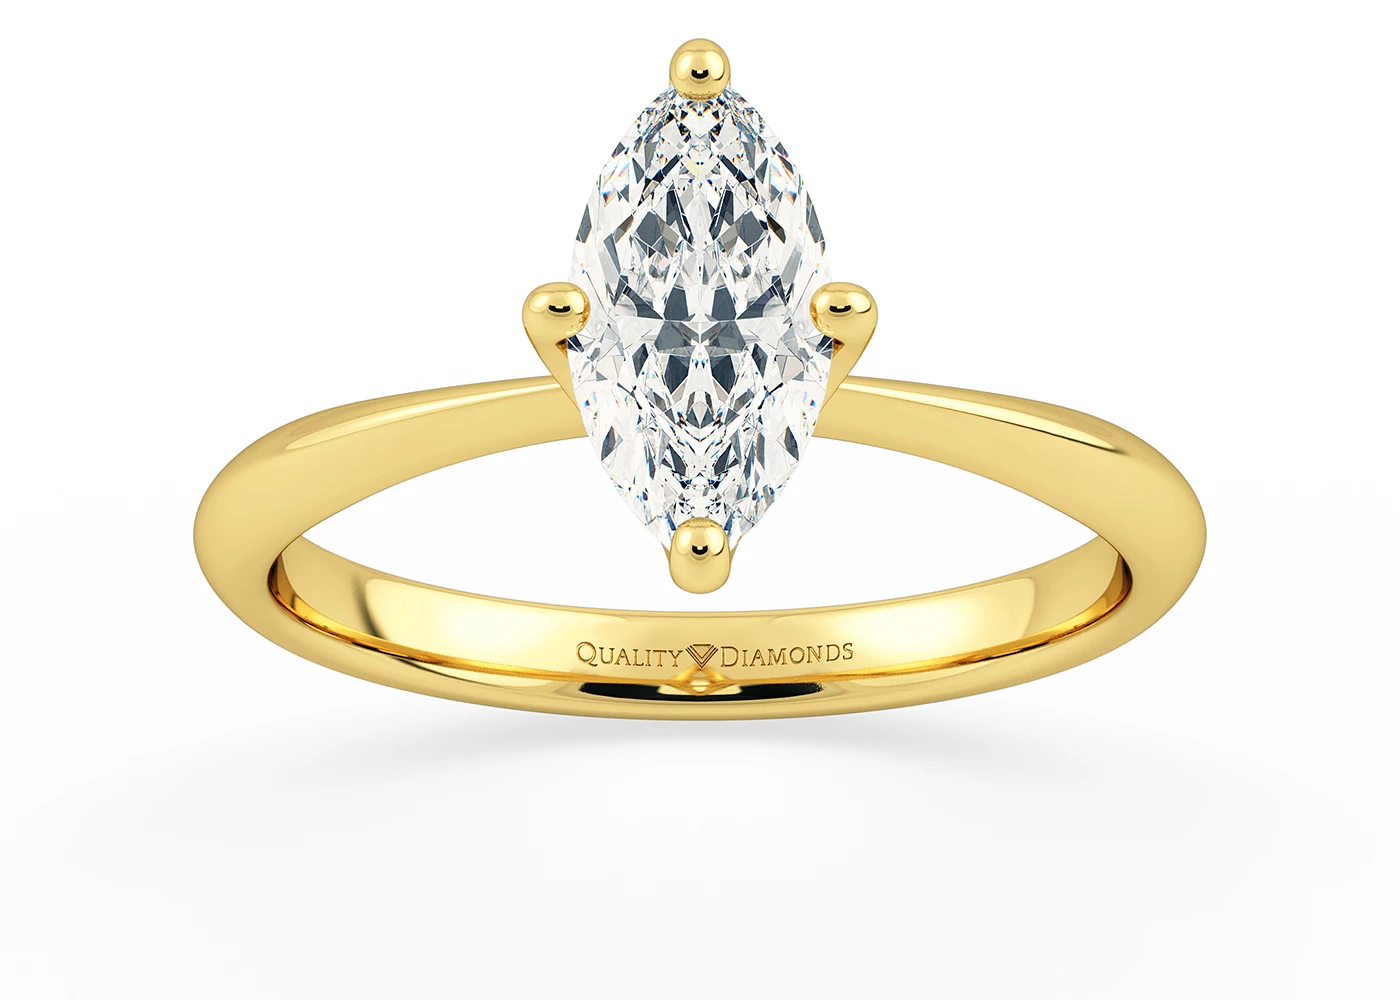 Two Carat Marquise Solitaire Diamond Engagement Ring in 18K Yellow Gold